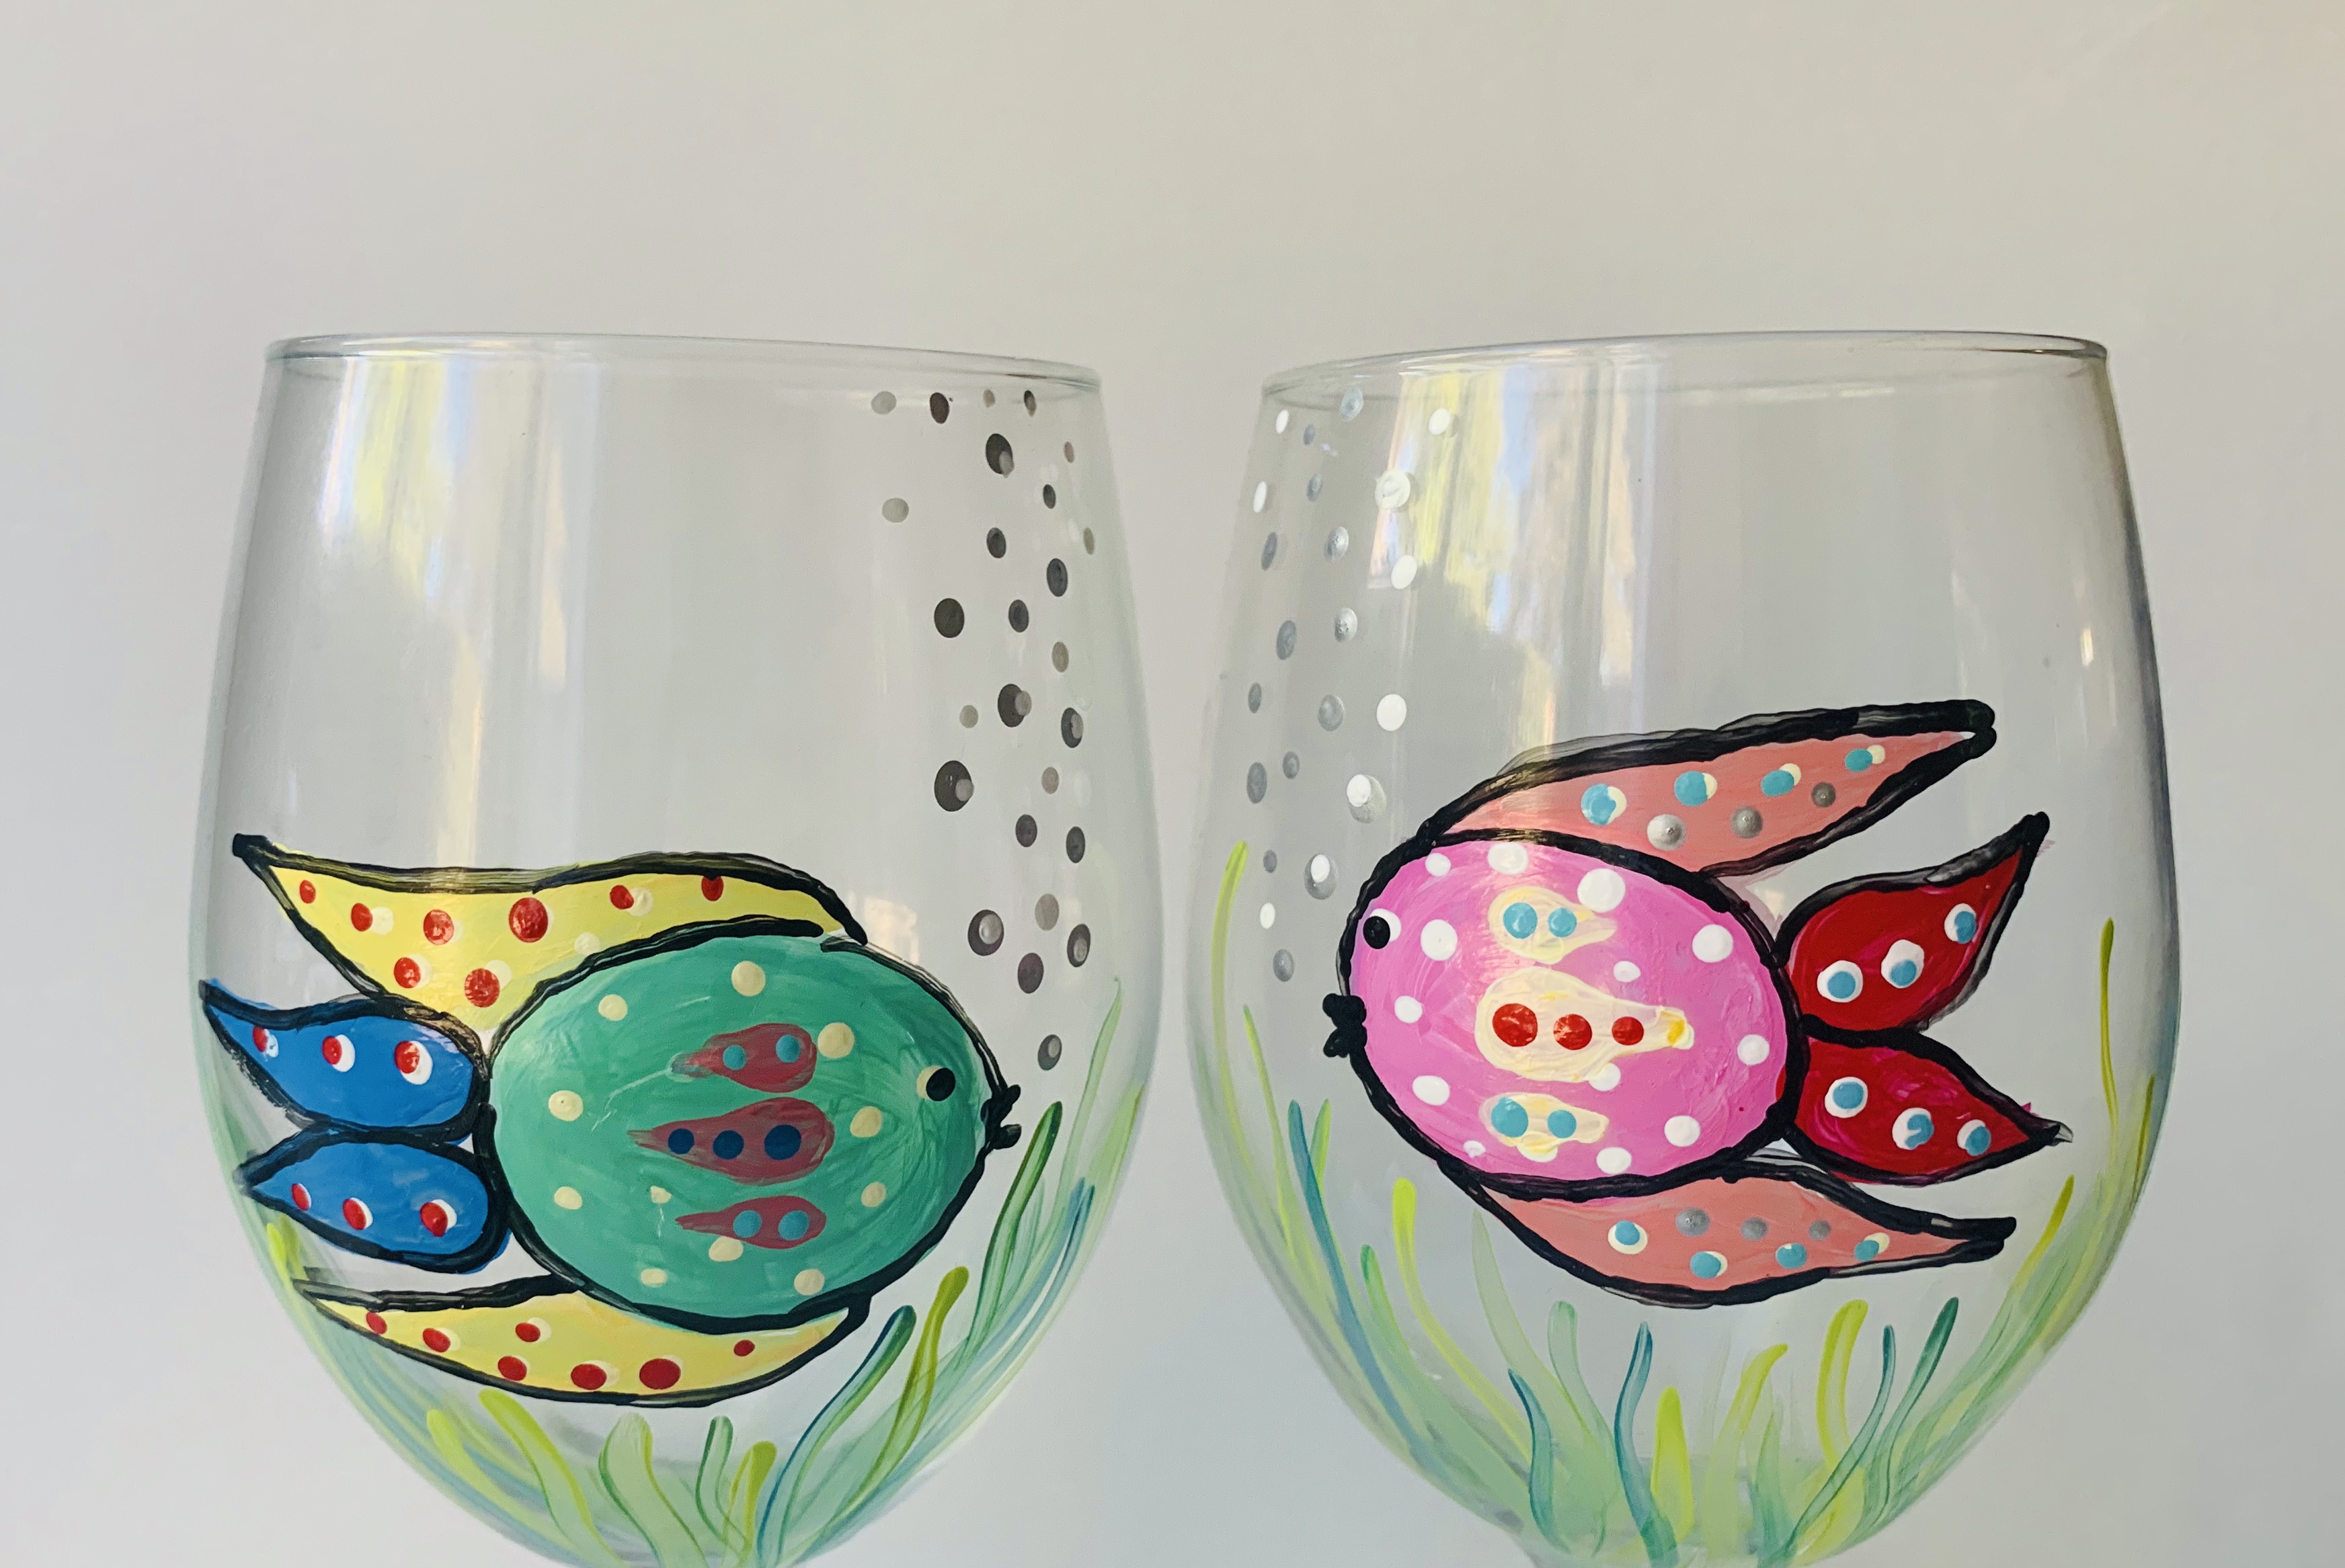 A Kissy Fish Wine Glasses experience project by Yaymaker